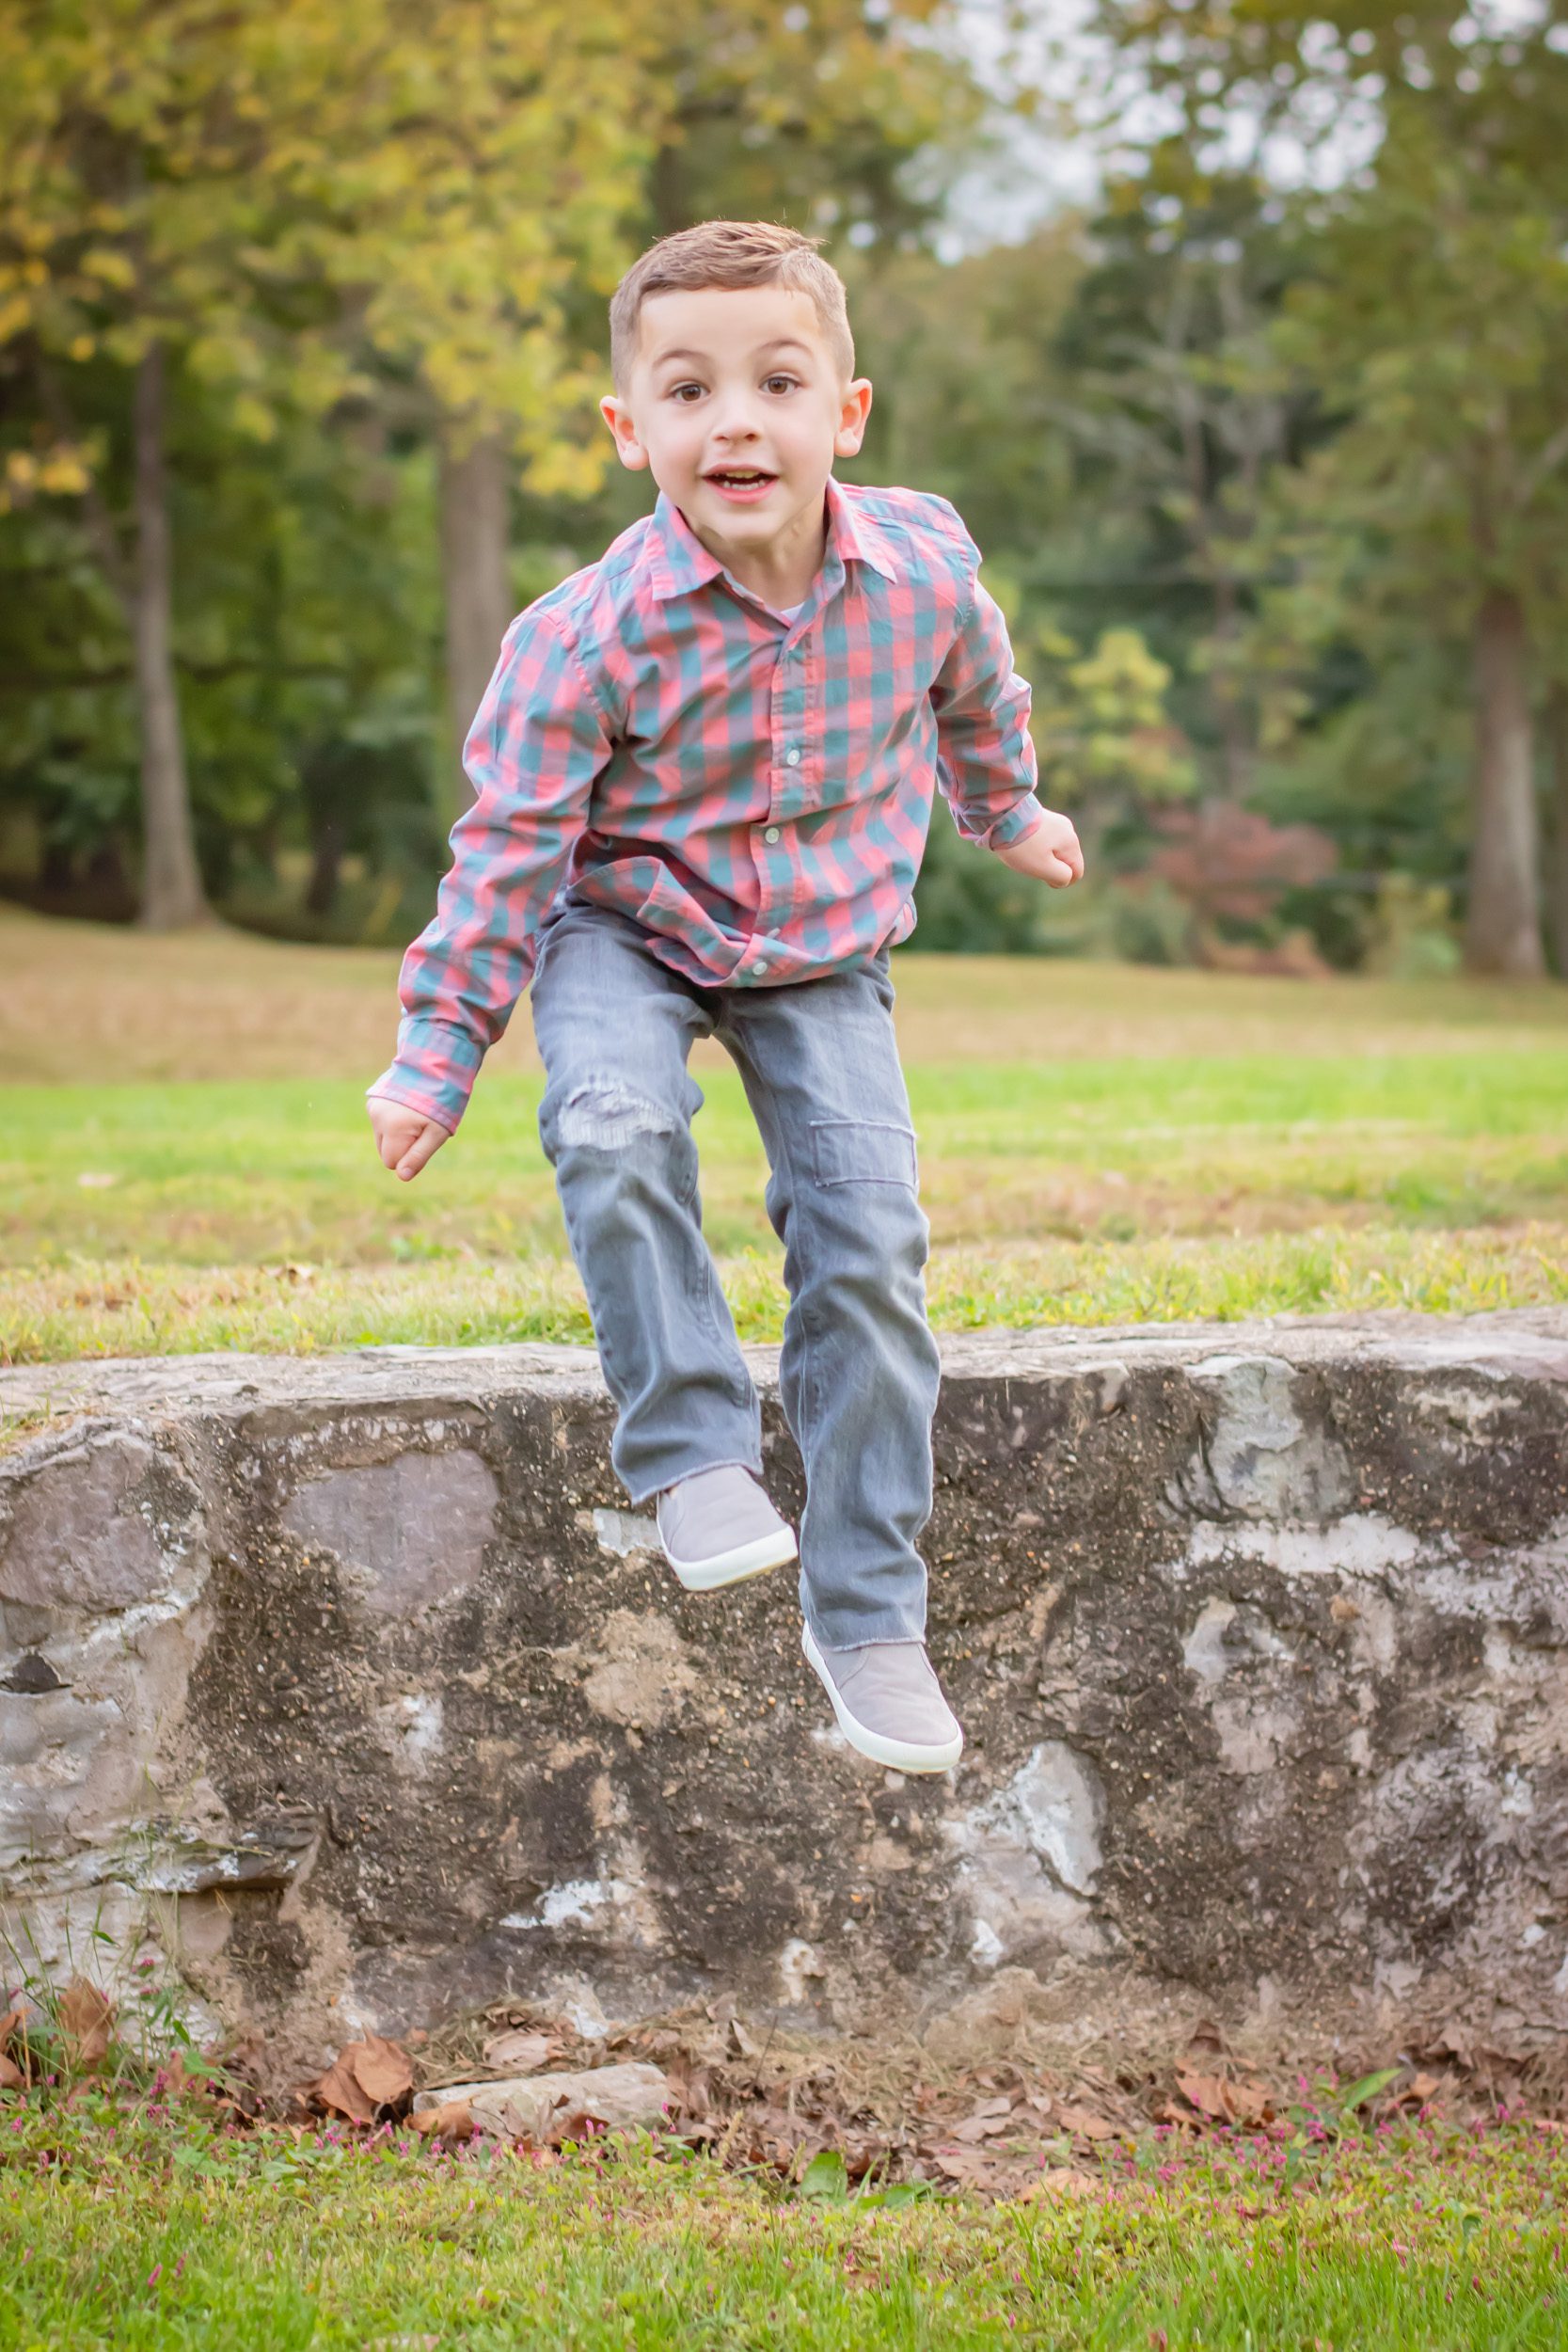 A young boy jumping off a stone wall and staring intently at the camera during a family photoshoot